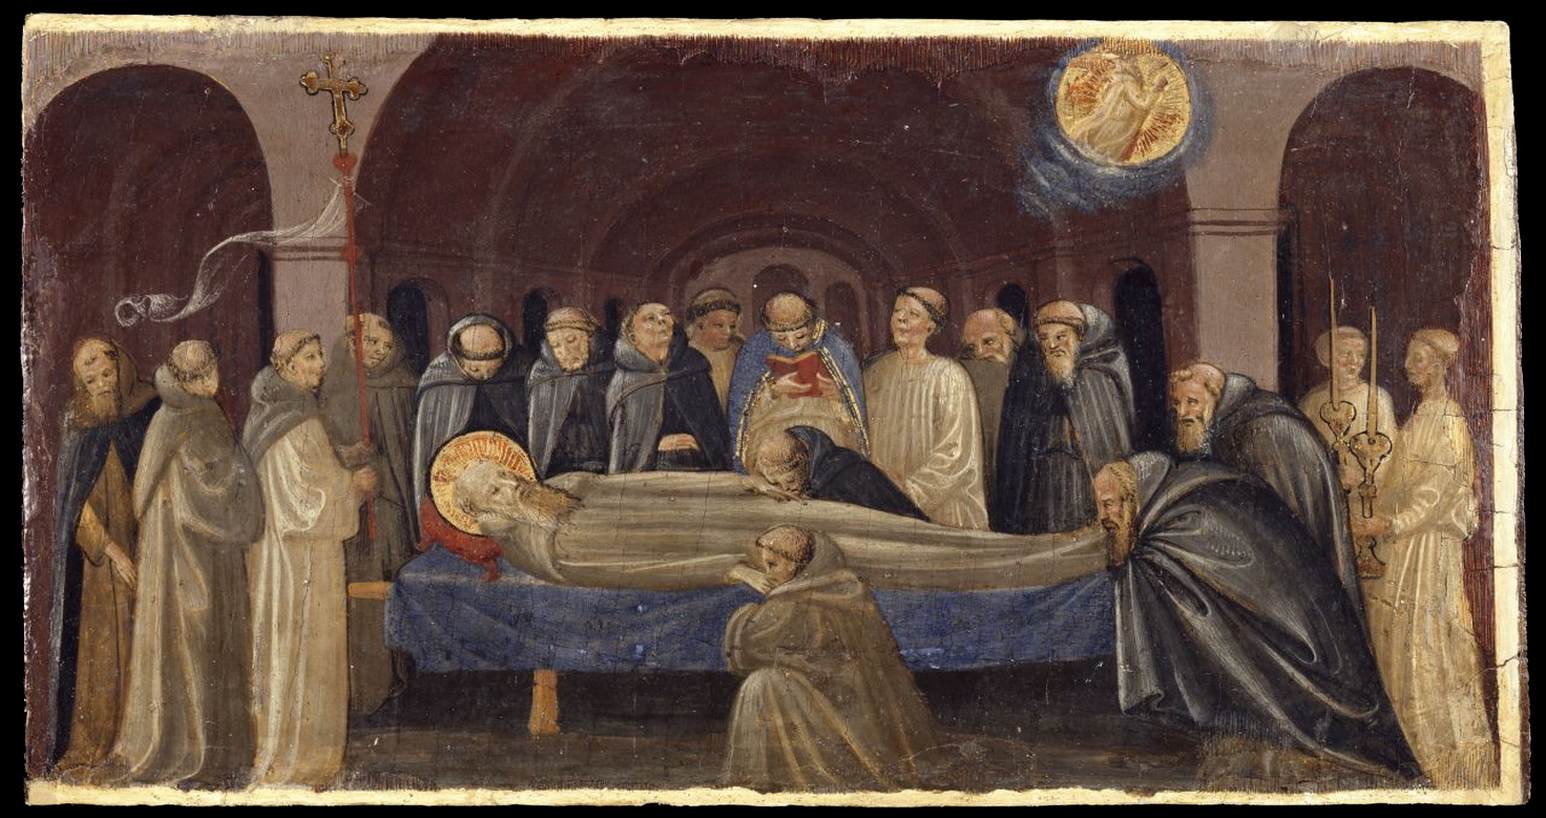 The Funeral of Saint Jerome